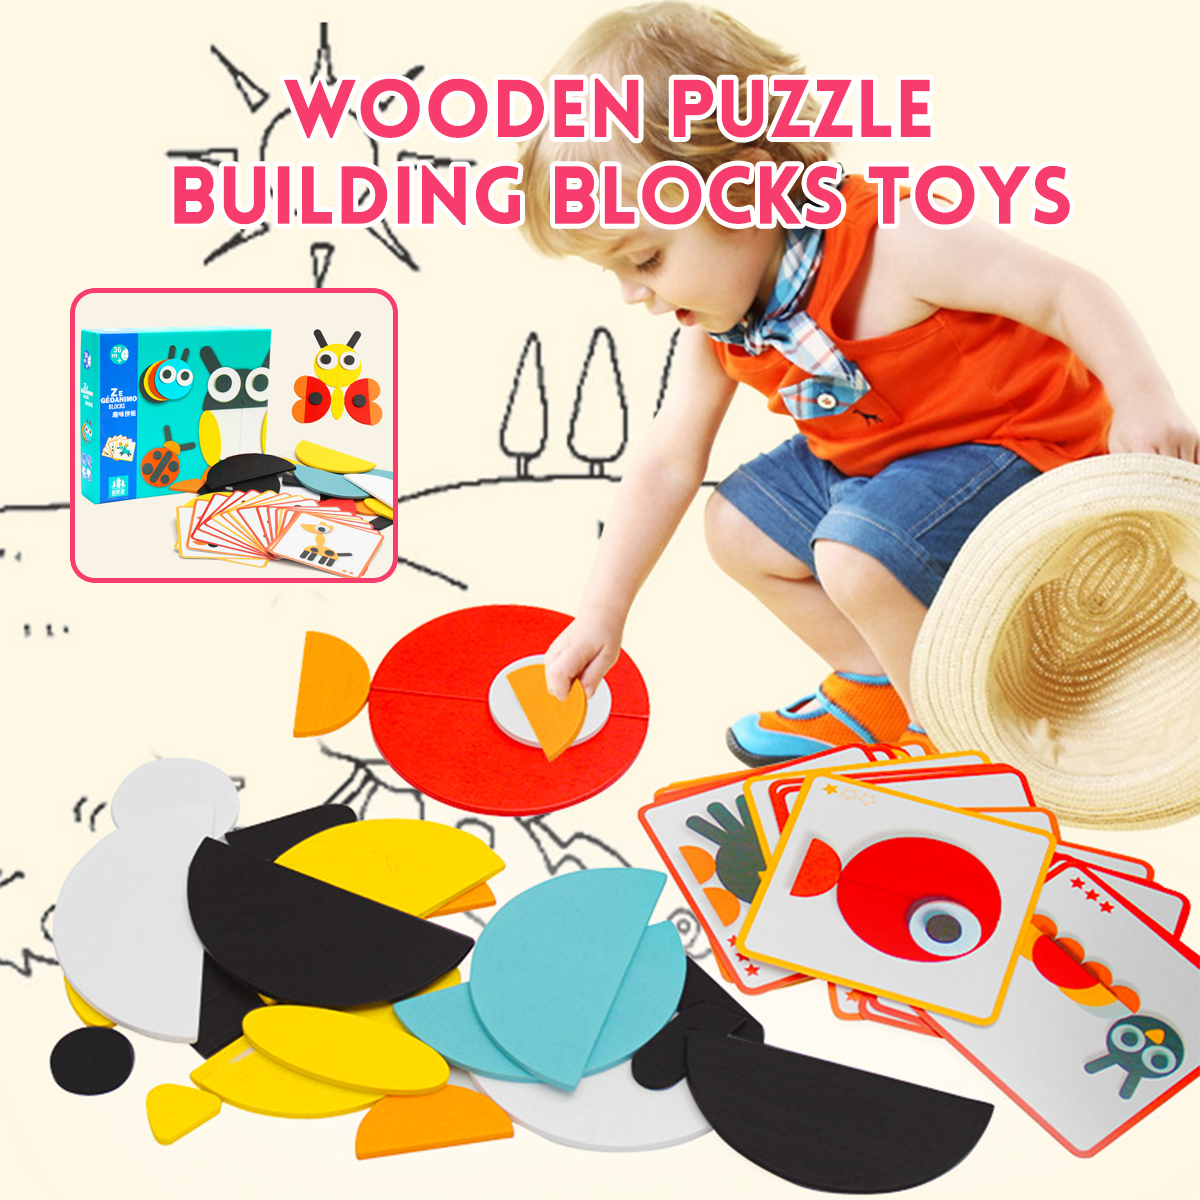 Wooden-Stereo-Puzzle-Building-Blocks-Kids-Early-Educational-Learning-Toys-Gifts-1709243-1